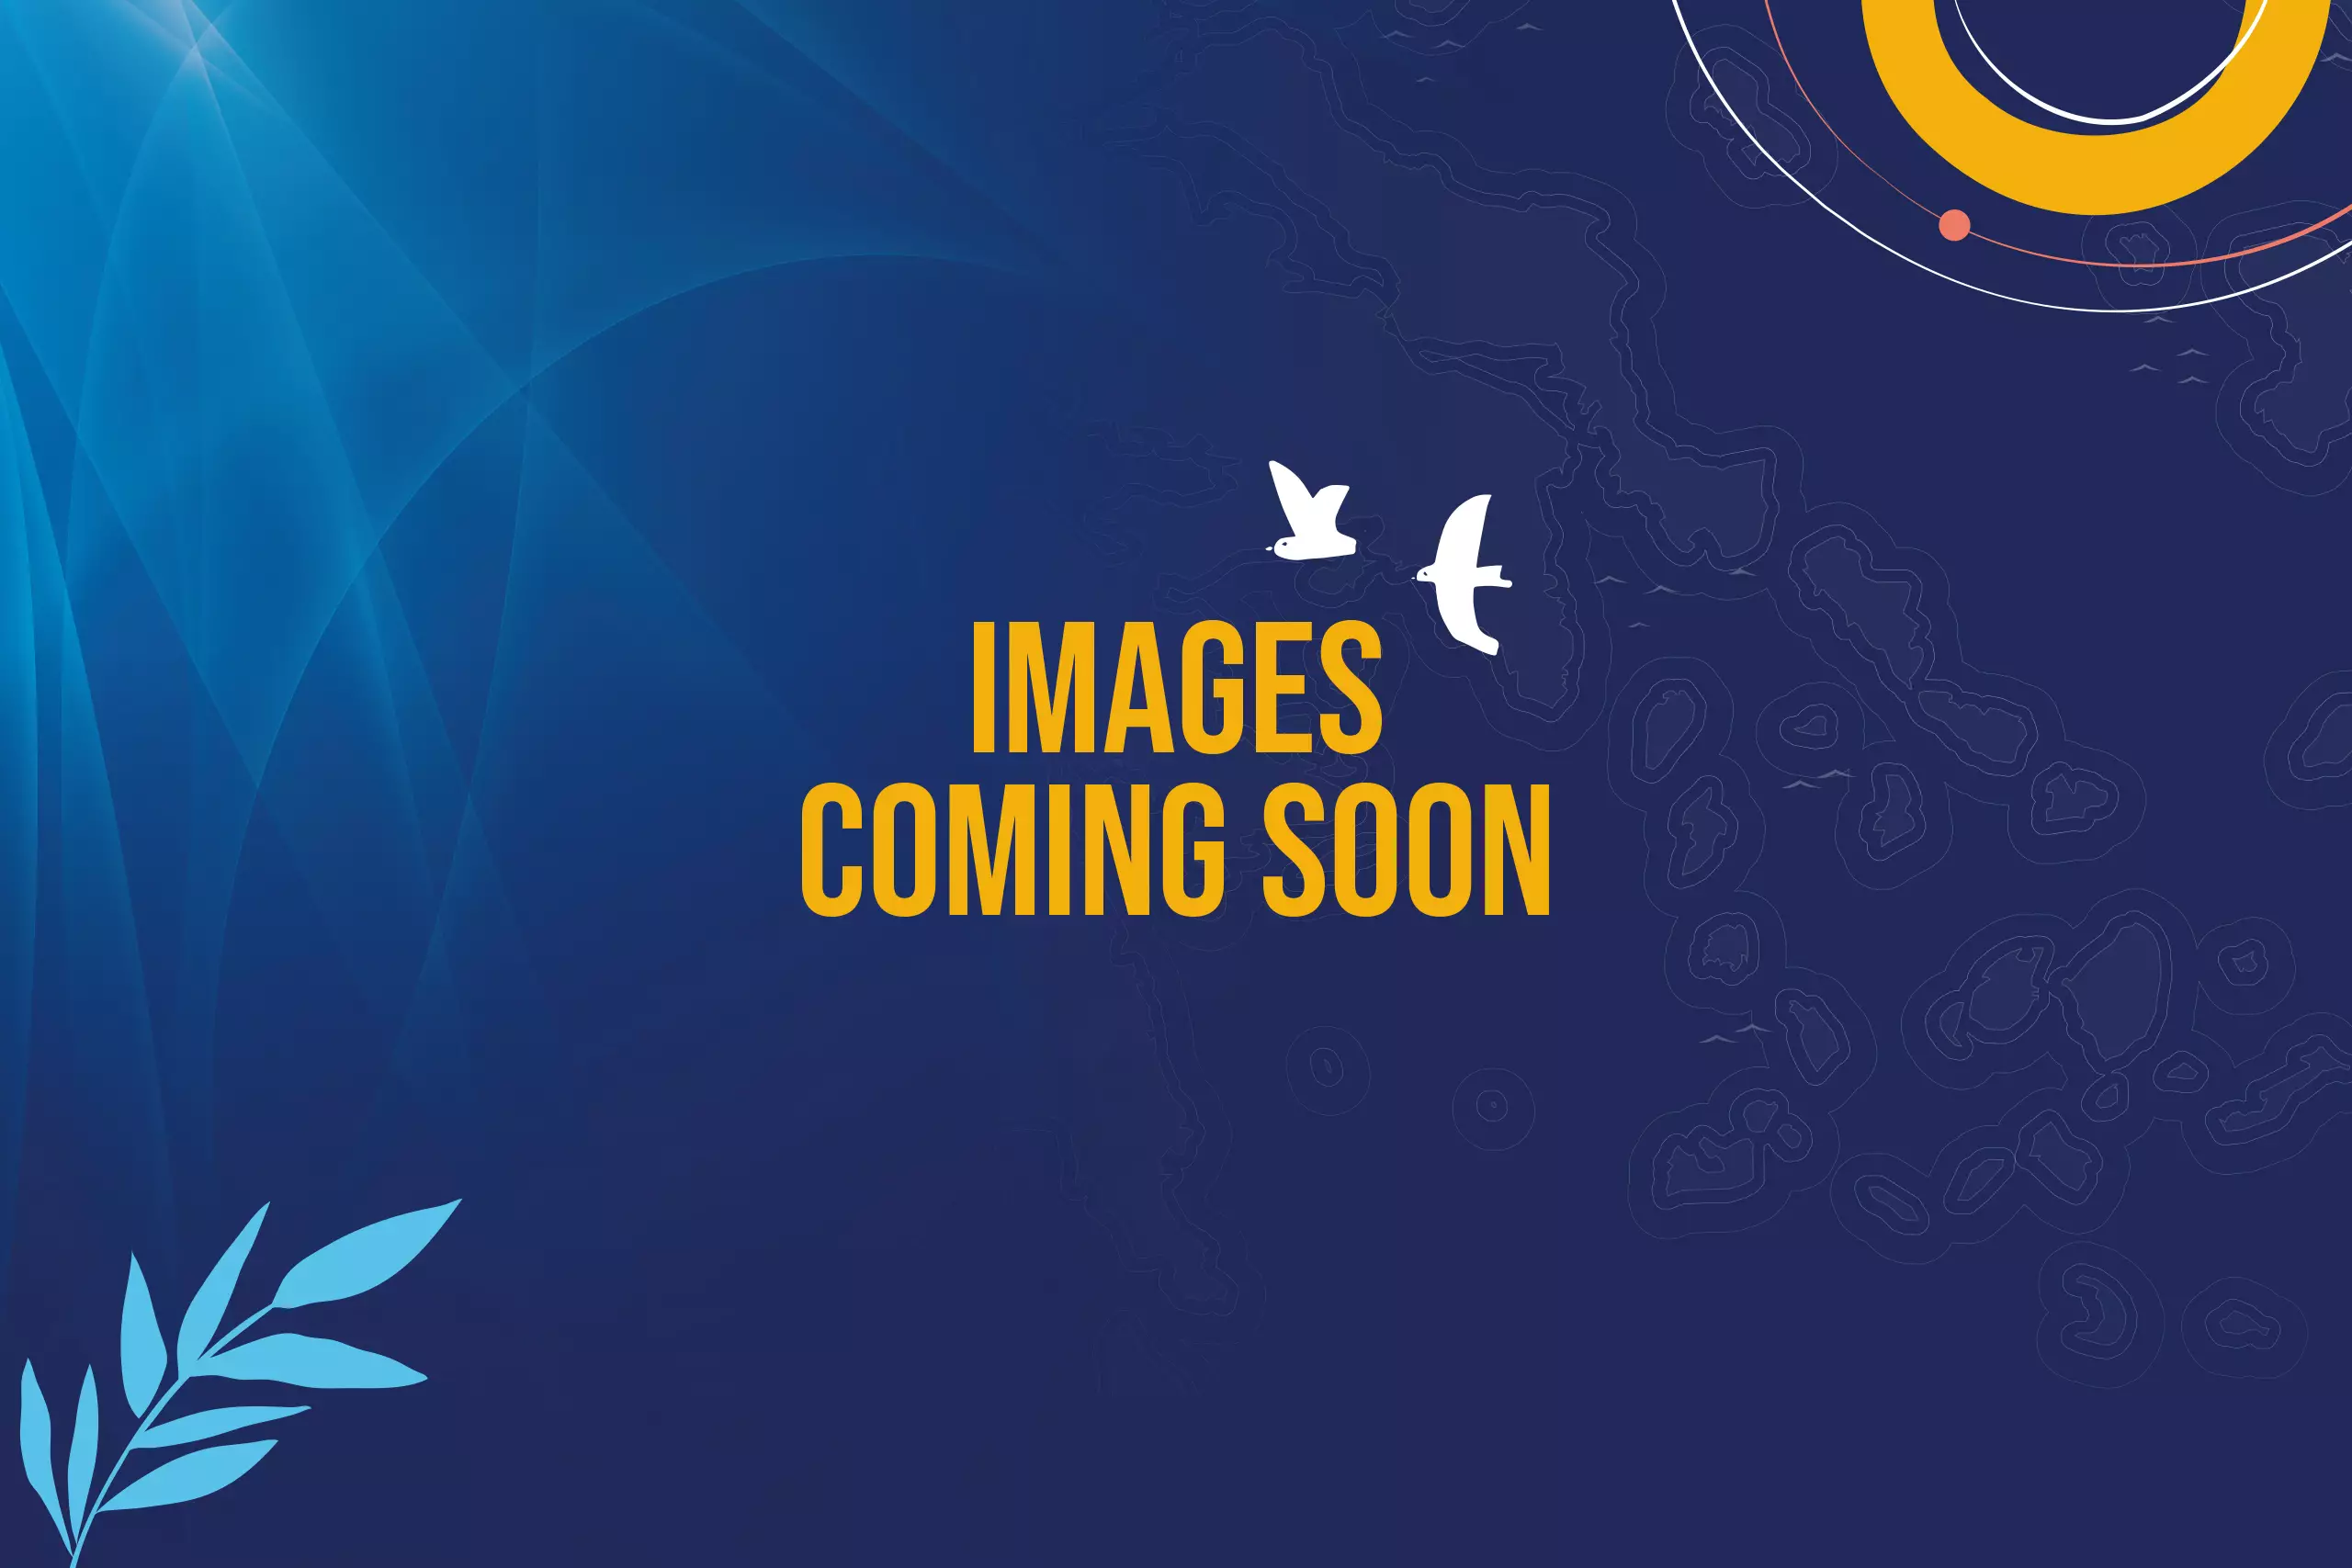 Celestyal Images Coming Soon Placeholder 2560x1707px